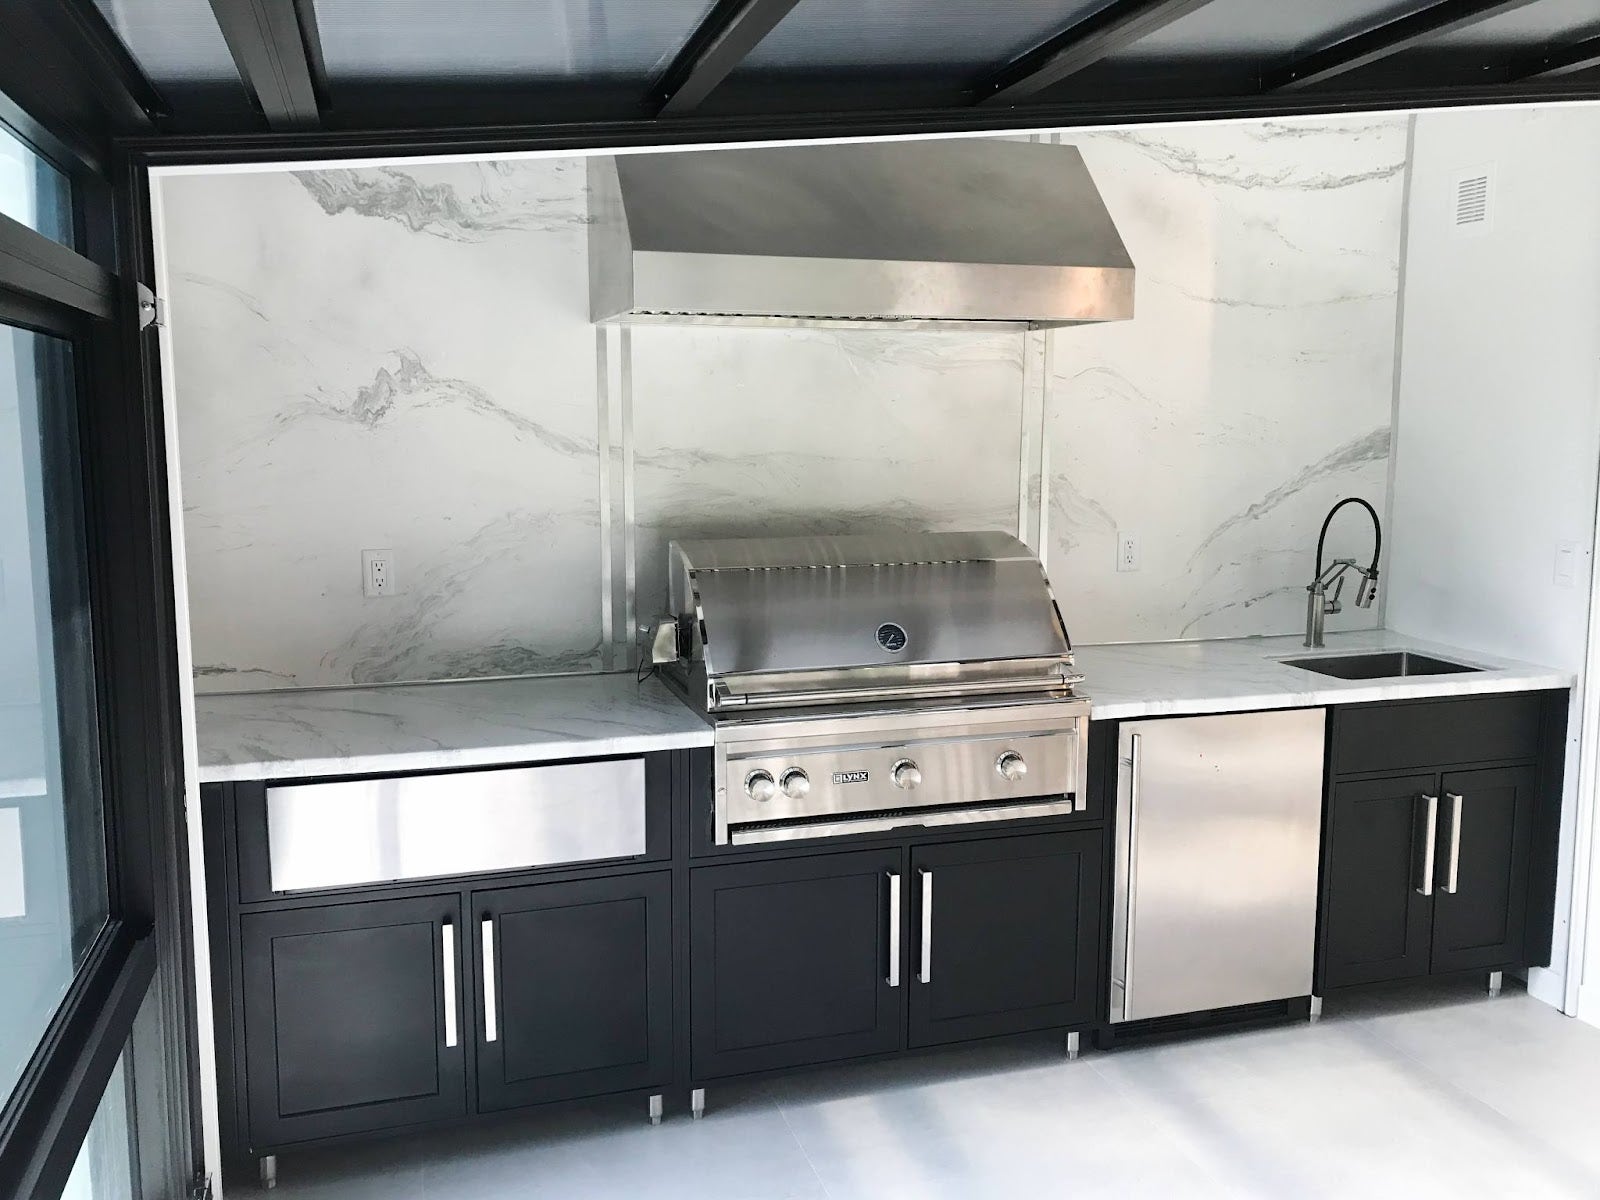 Modern indoor kitchen with a Proline range hood, featuring marble walls and black cabinetry, reflecting an elegant monochromatic design - prolinerangehoods.com